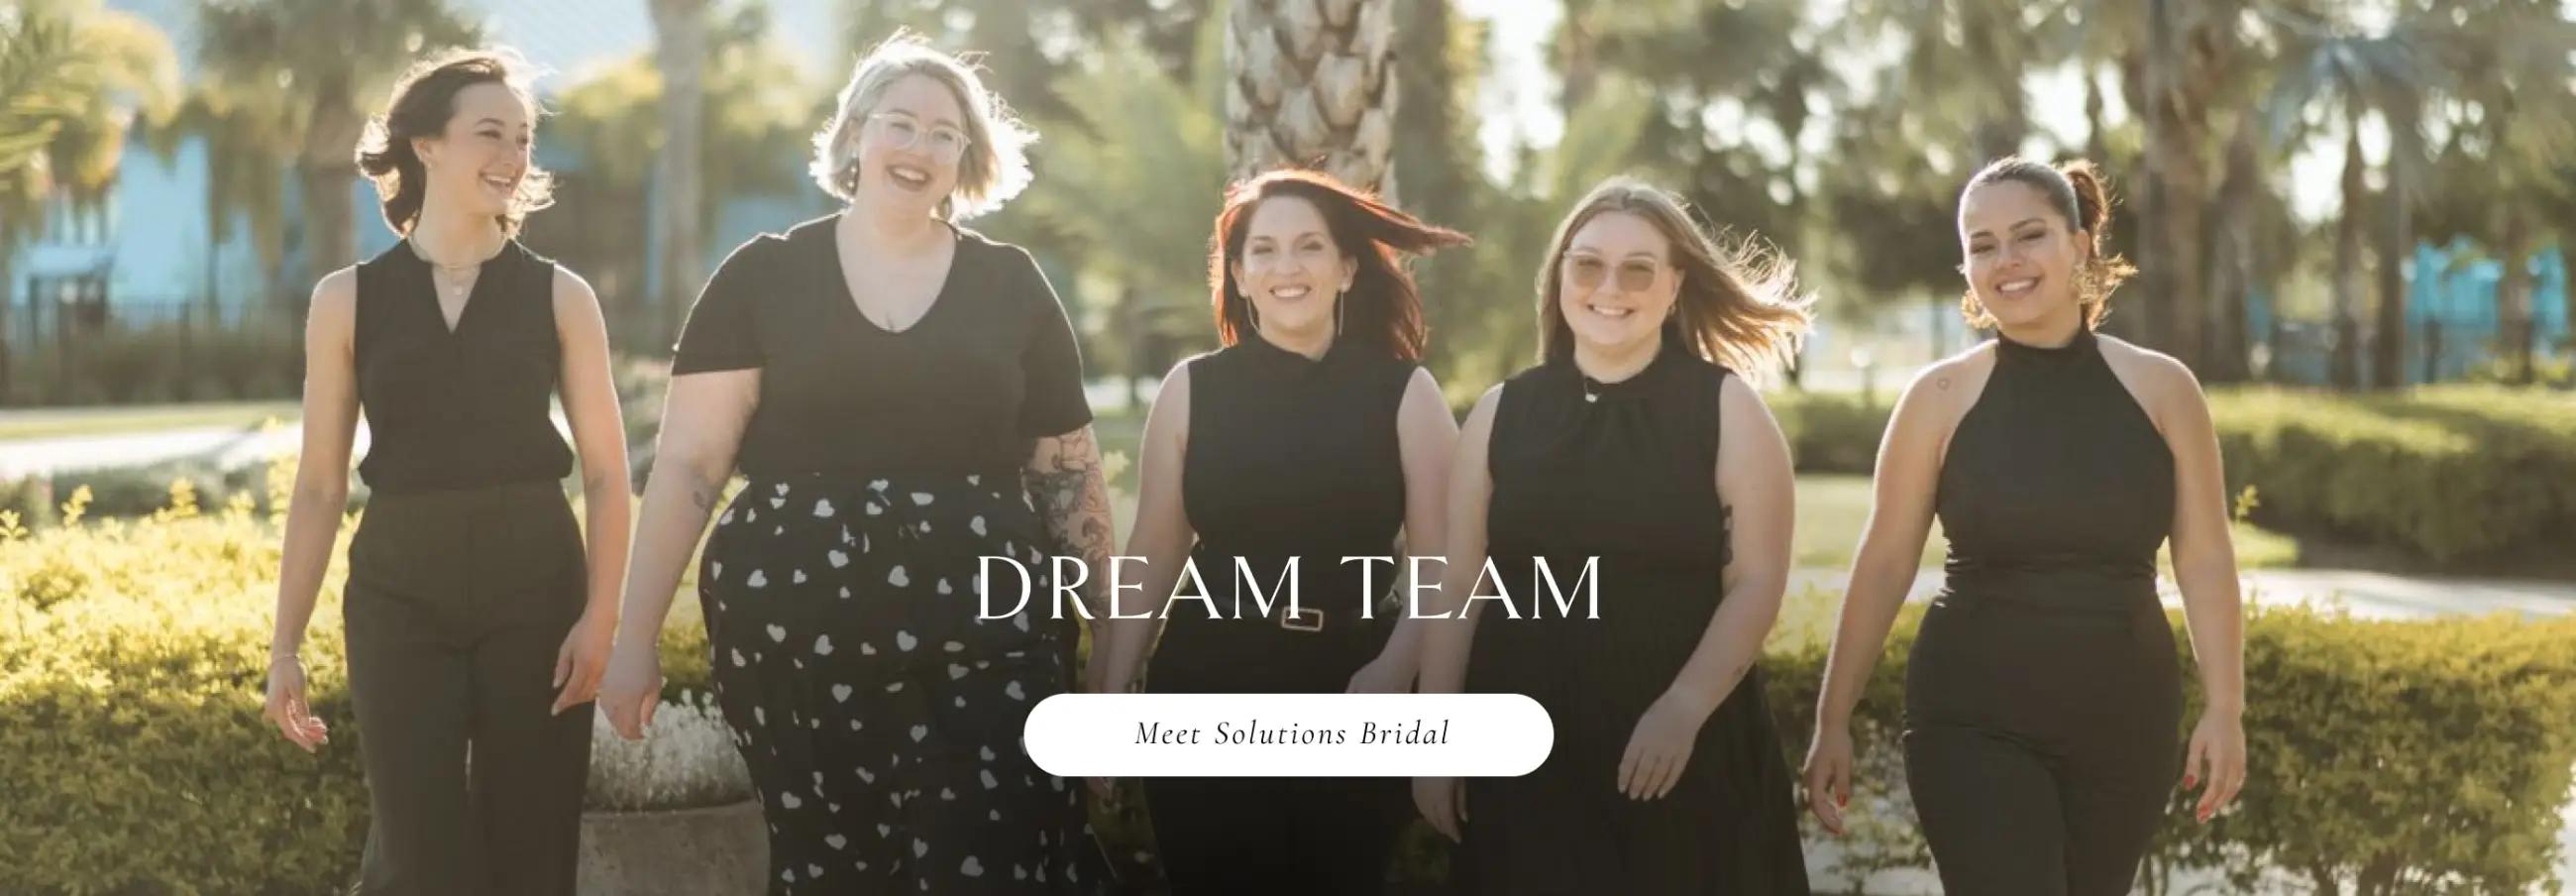 Meet the Team at Solutions Bridal